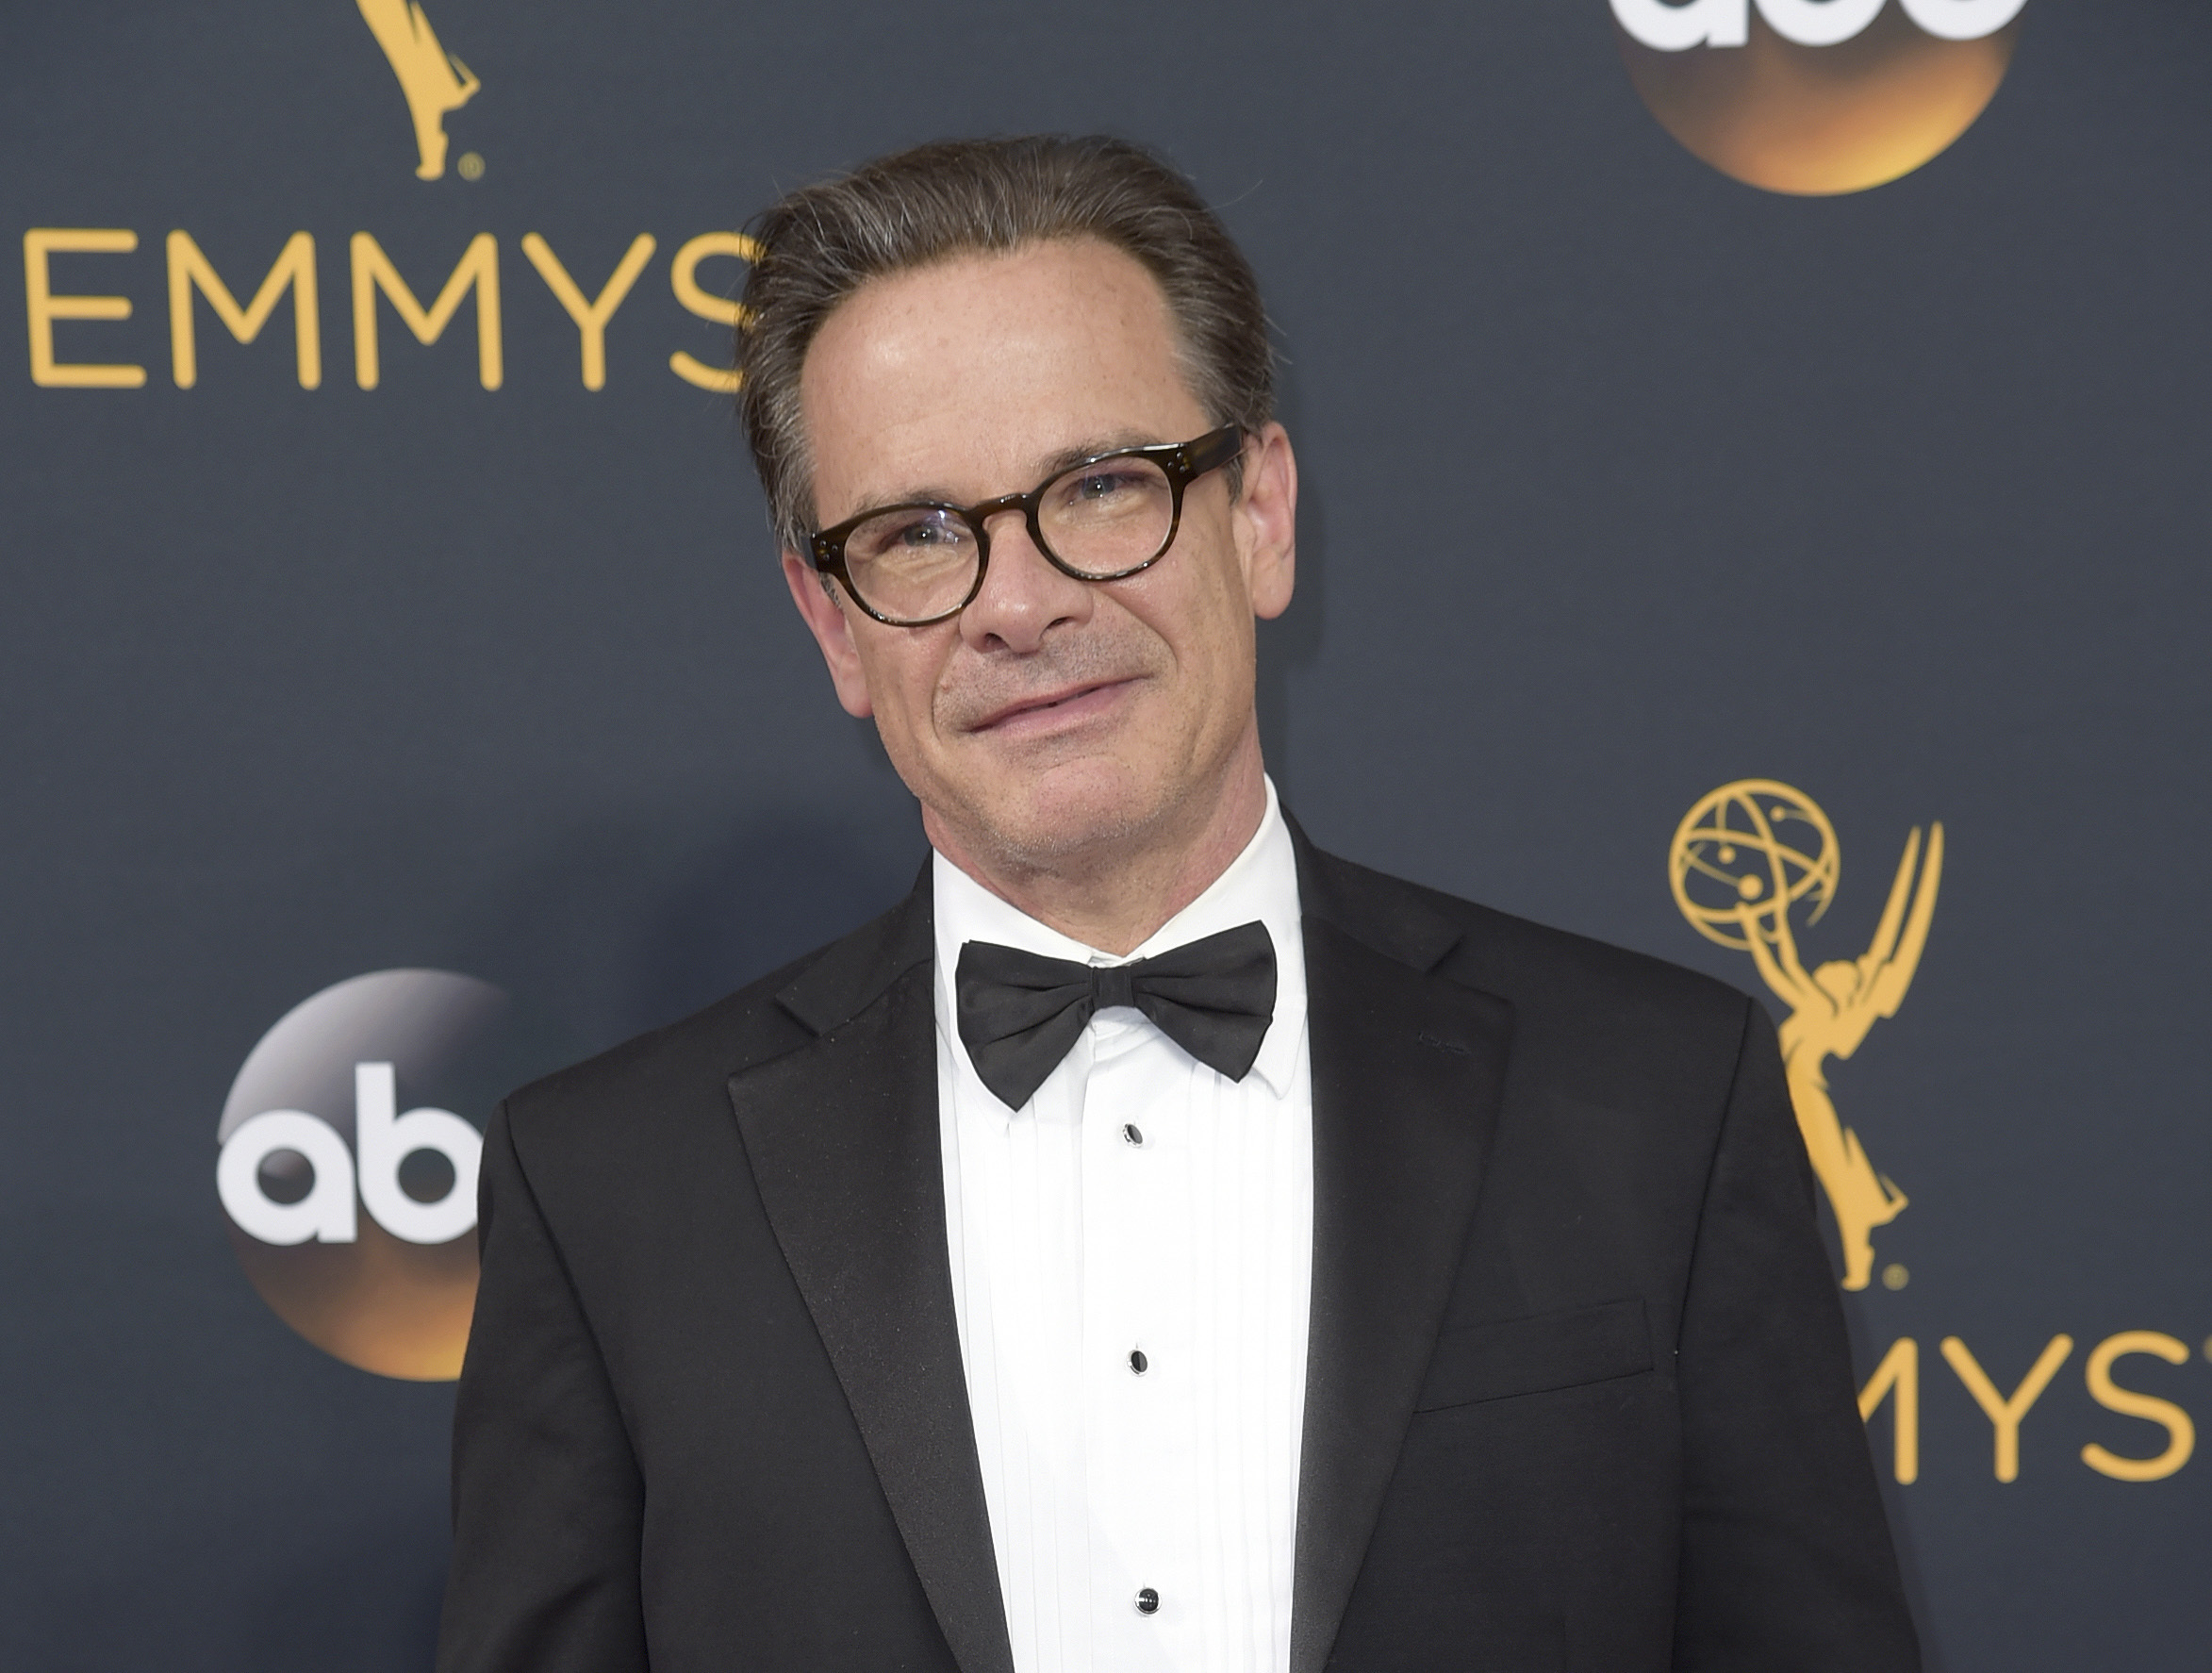 FILE - Peter Scolari arrives at the 68th Primetime Emmy Awards in Los Angeles on Sept. 18, 2016. Scolari, a versatile character actor whose television roles included a yuppie producer on “Newhart” and a closeted dad on “Girls” and who was on Broadway in “Hairspray” and “Wicked,” died Friday morning in New York after fighting cancer for two years, according to Ellen Lubin Sanitsky, his longtime manager. He was 66. (Photo by Richard Shotwell/Invision/AP, File)